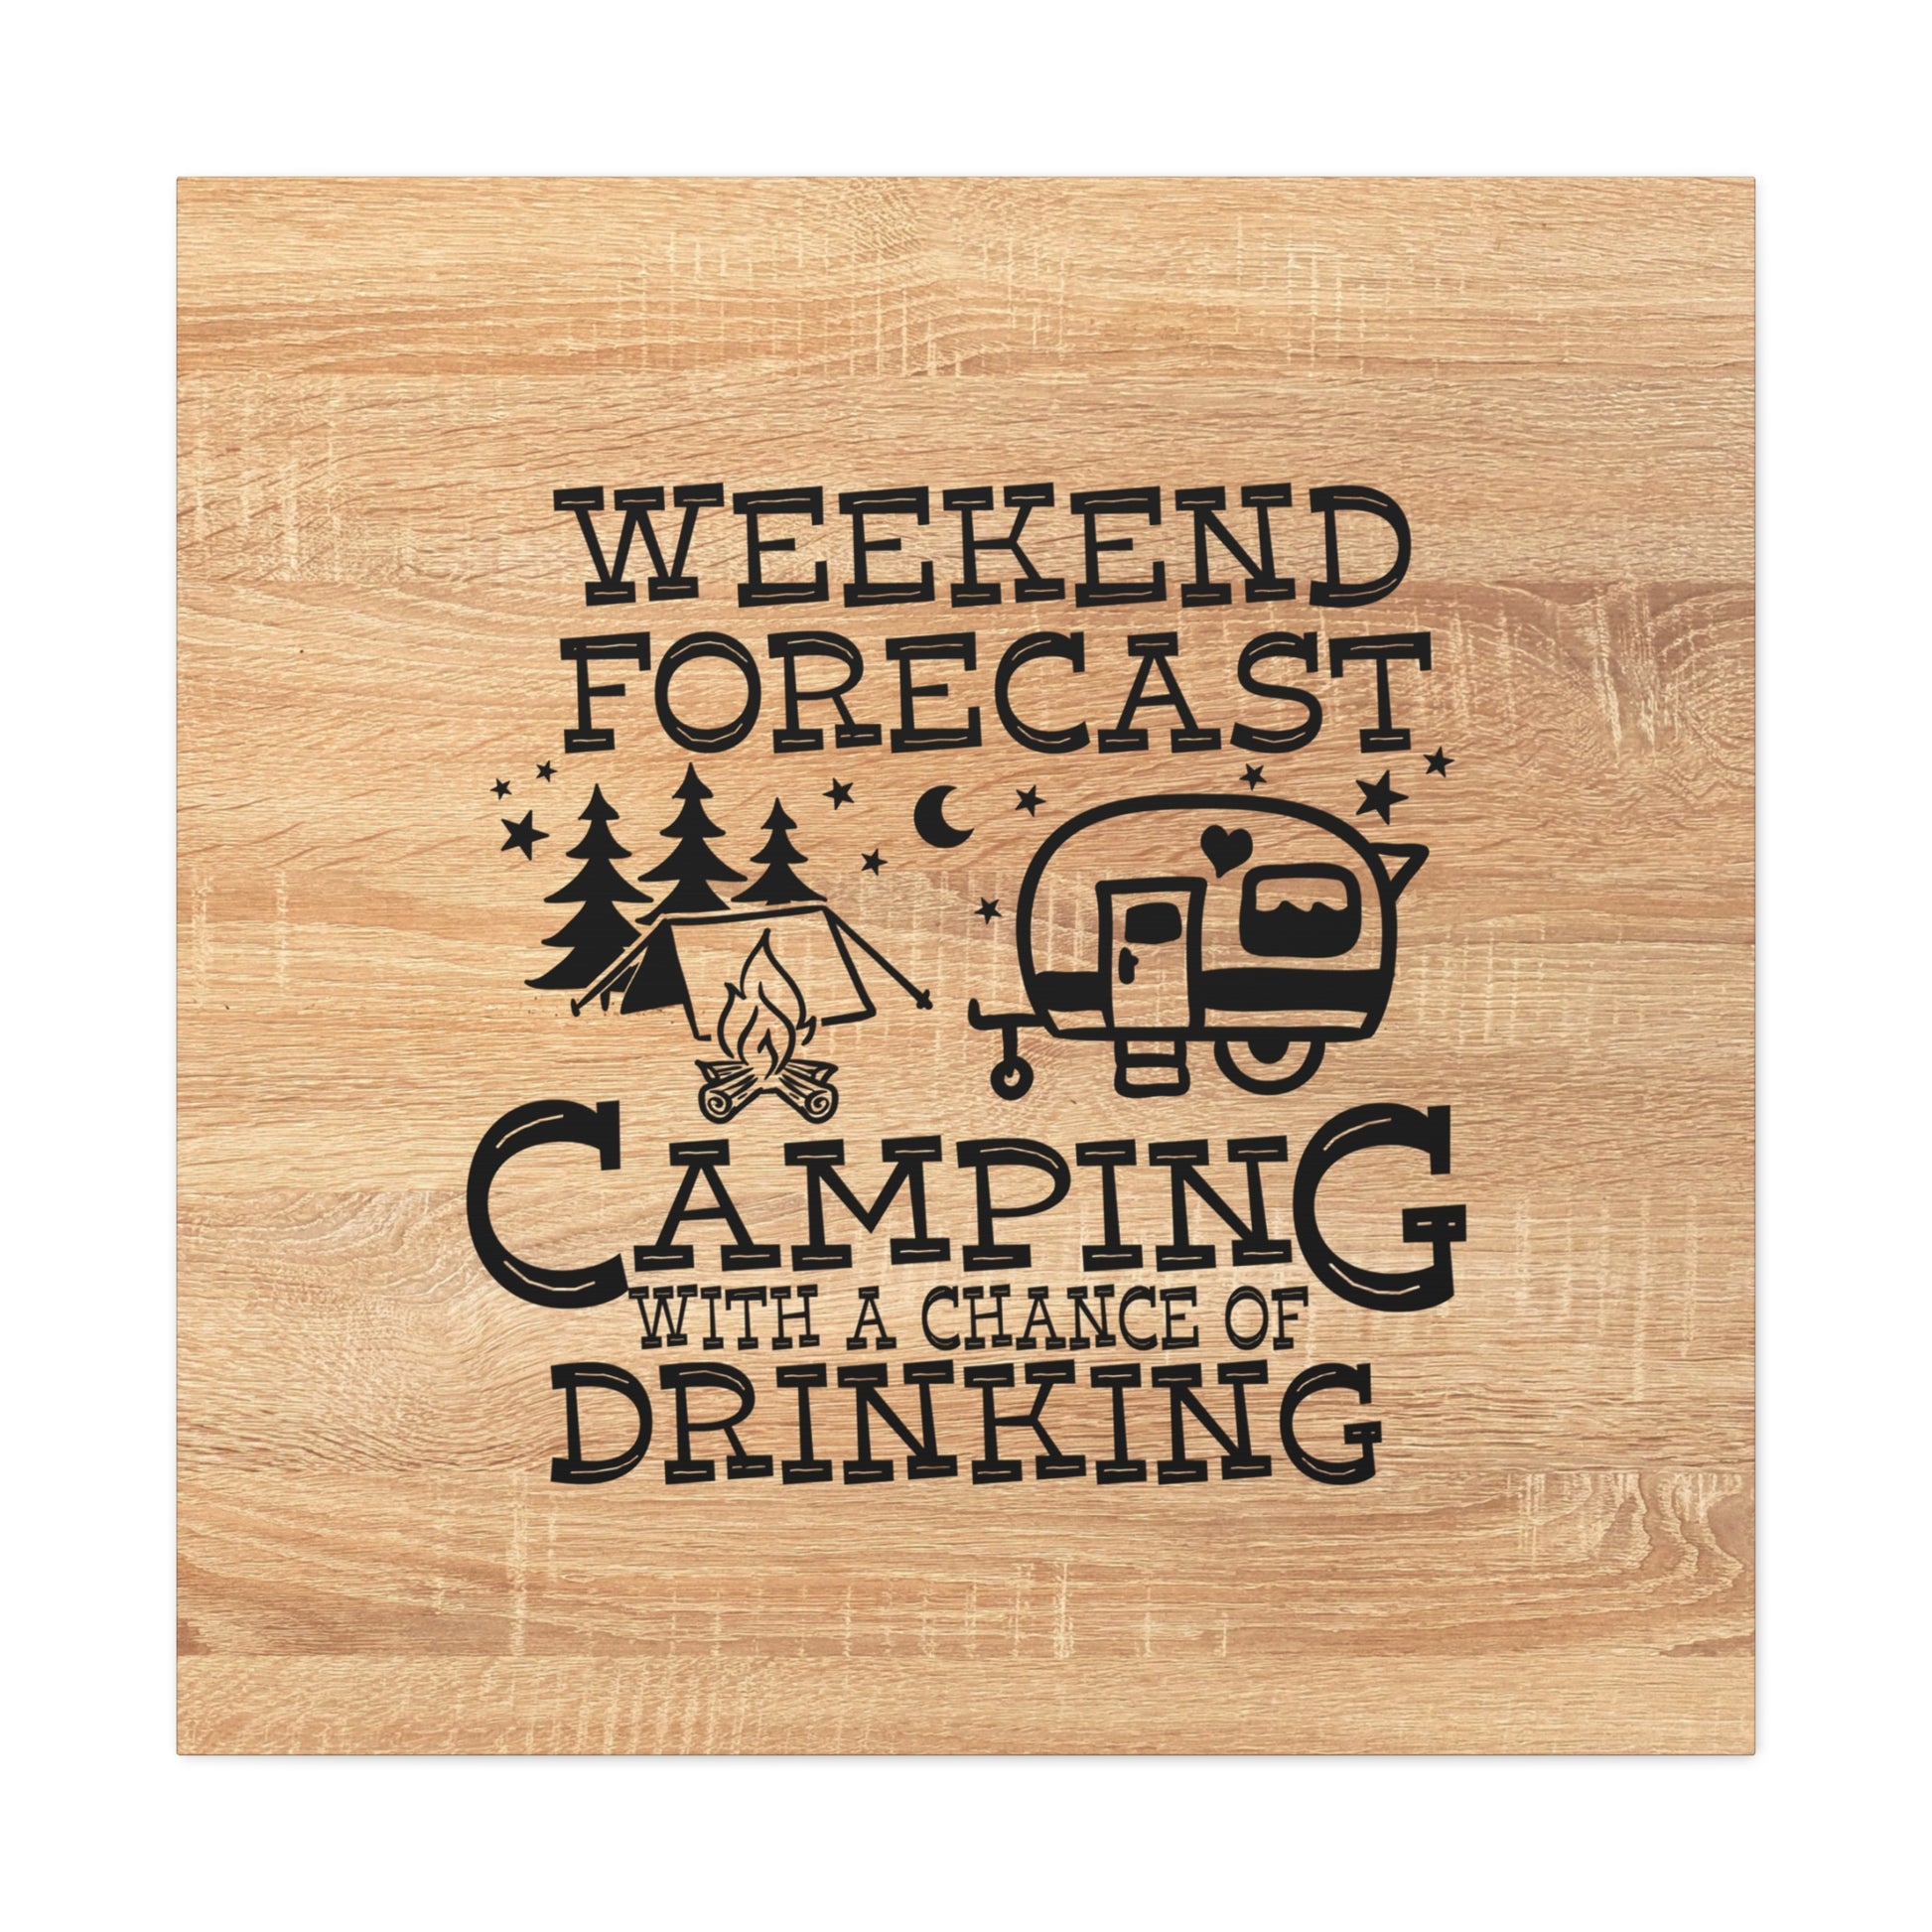 "Weekend Forecast, Camping & Drinking" Wall Art - Weave Got Gifts - Unique Gifts You Won’t Find Anywhere Else!